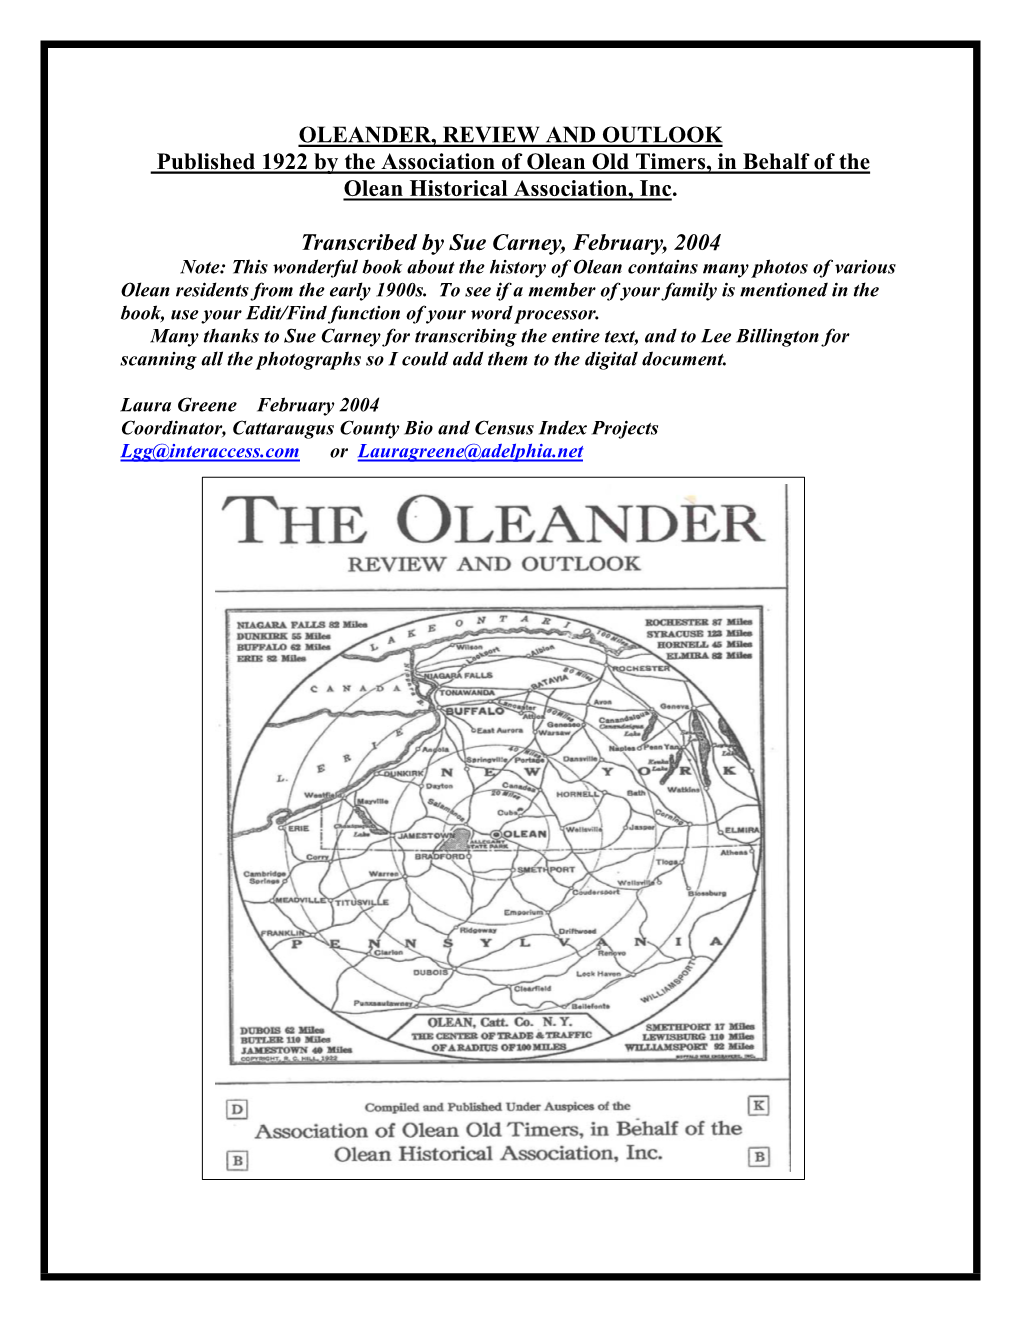 OLEANDER, REVIEW and OUTLOOK Published 1922 by the Association of Olean Old Timers, in Behalf of the Olean Historical Association, Inc